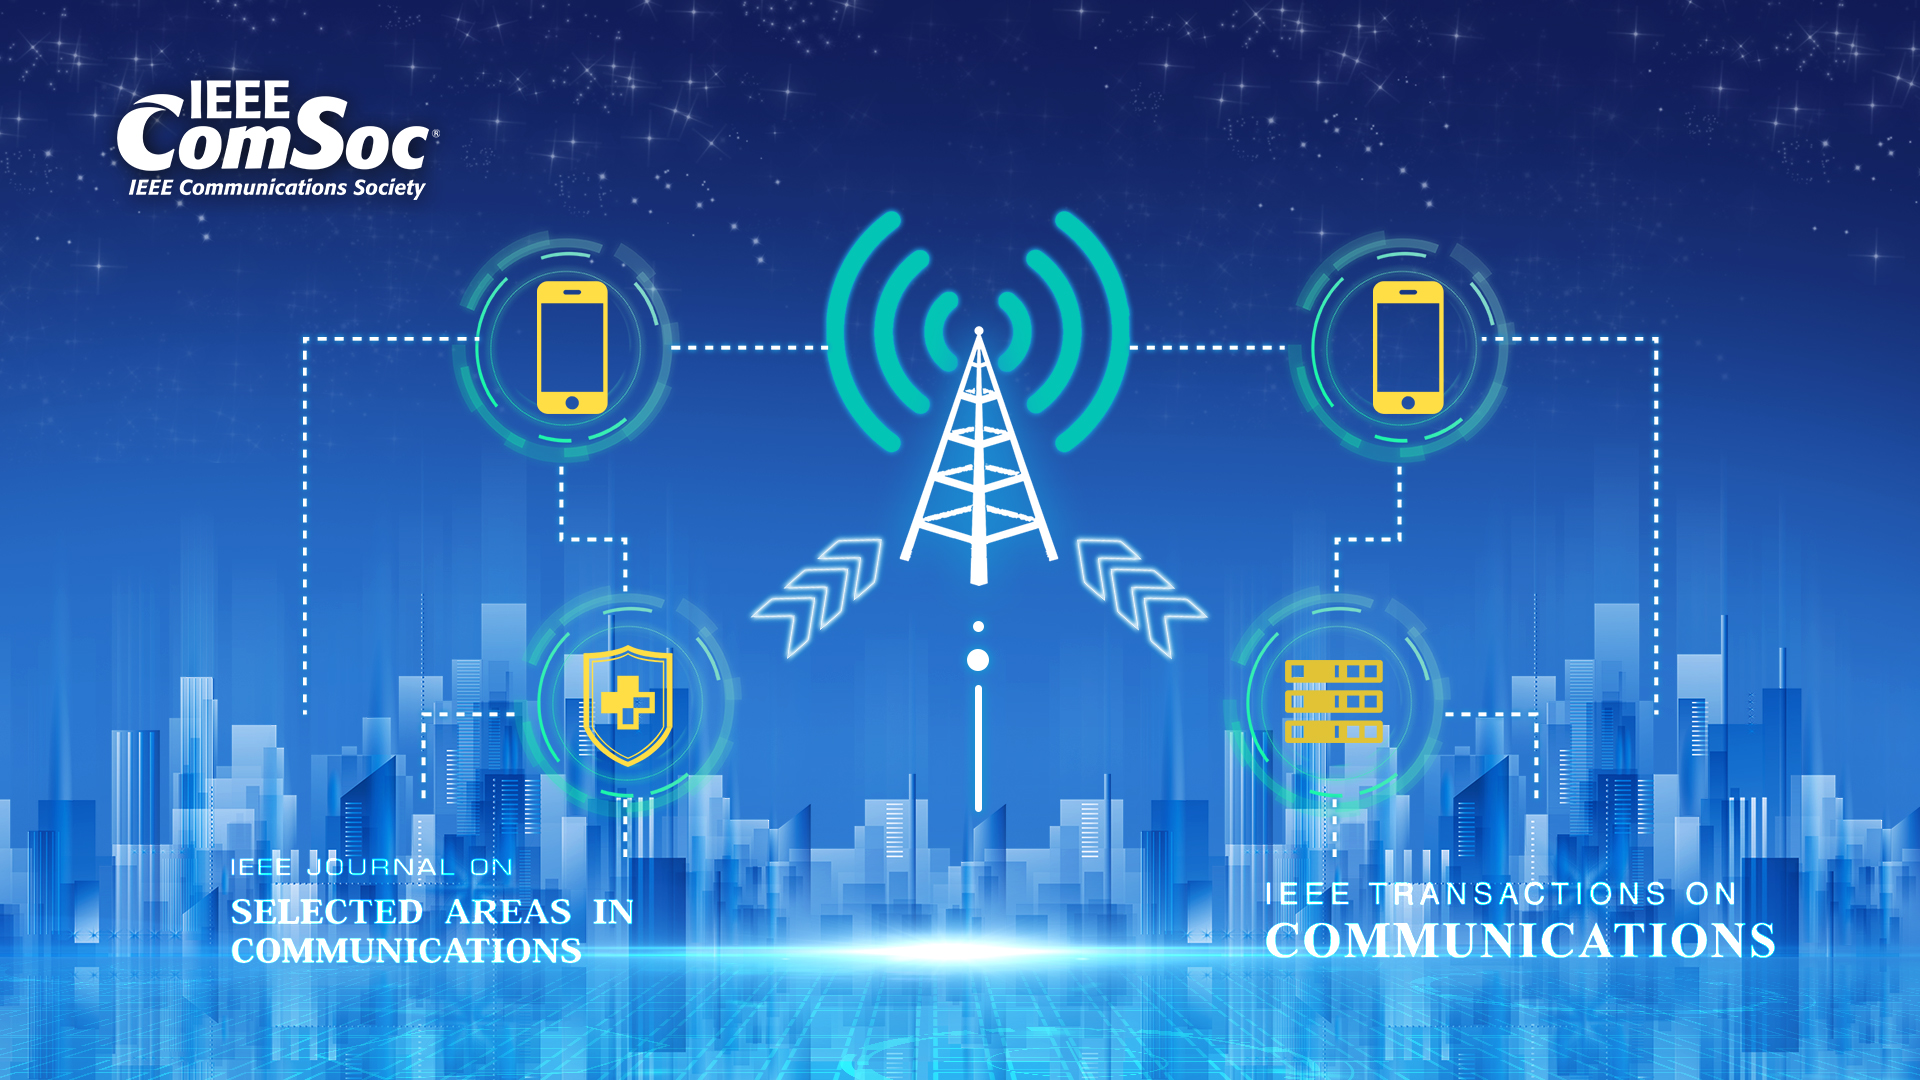 Wireless communications to become faster and more secure